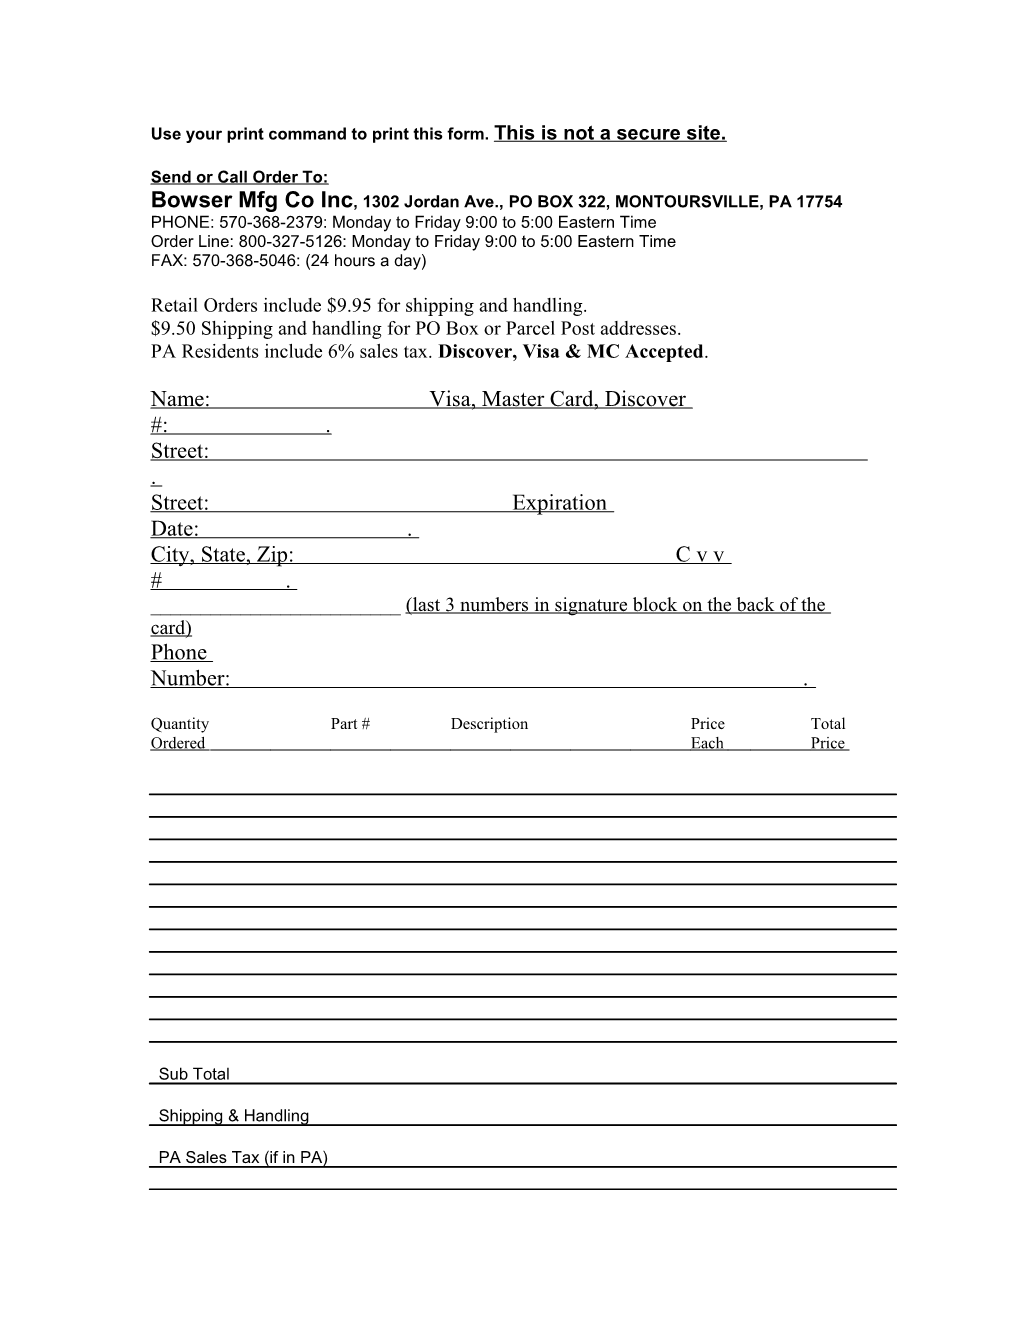 Use Your Print Command to Print This Form